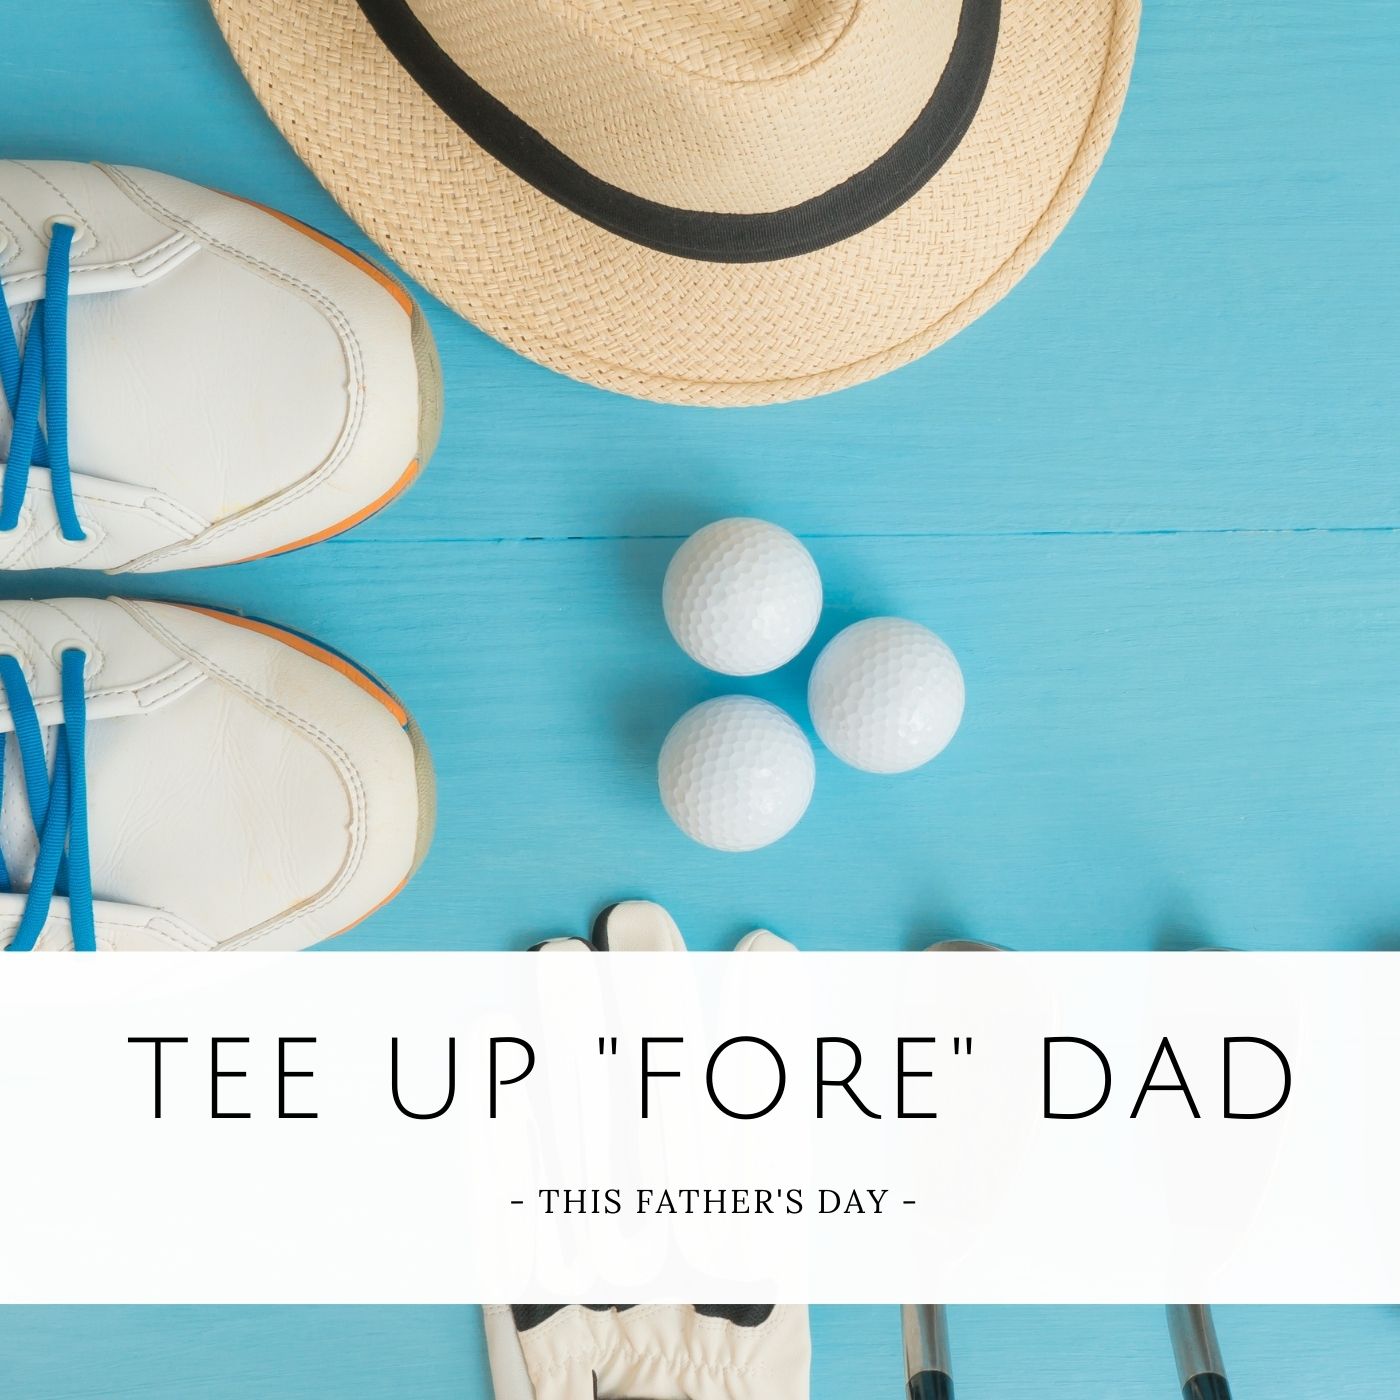 Golf gifts for dad for Father's Day